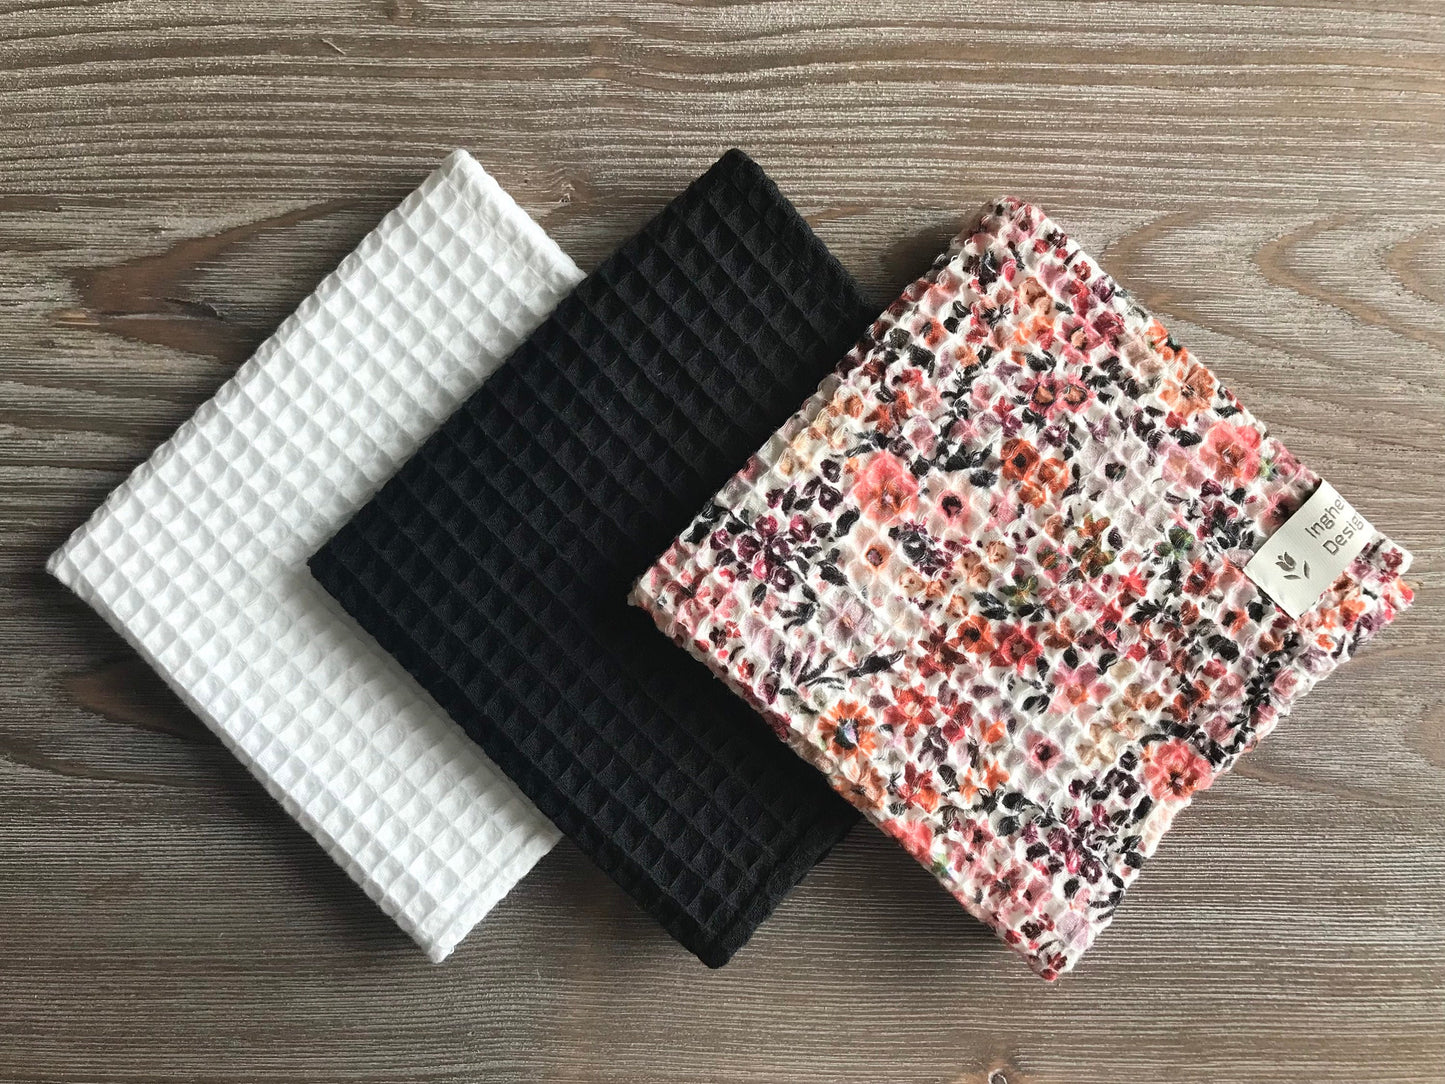 Set of 3 cotton fingertip towels. Waffle weave cotton. Black, white, pink flowers